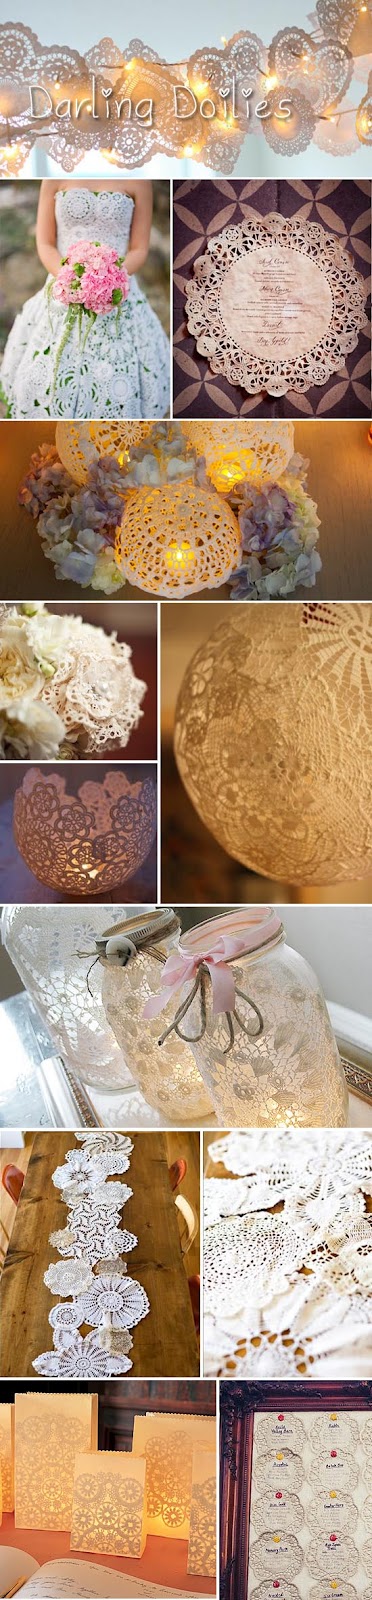 Incorporate doilies into the decor at your wedding and prepare to wow guests